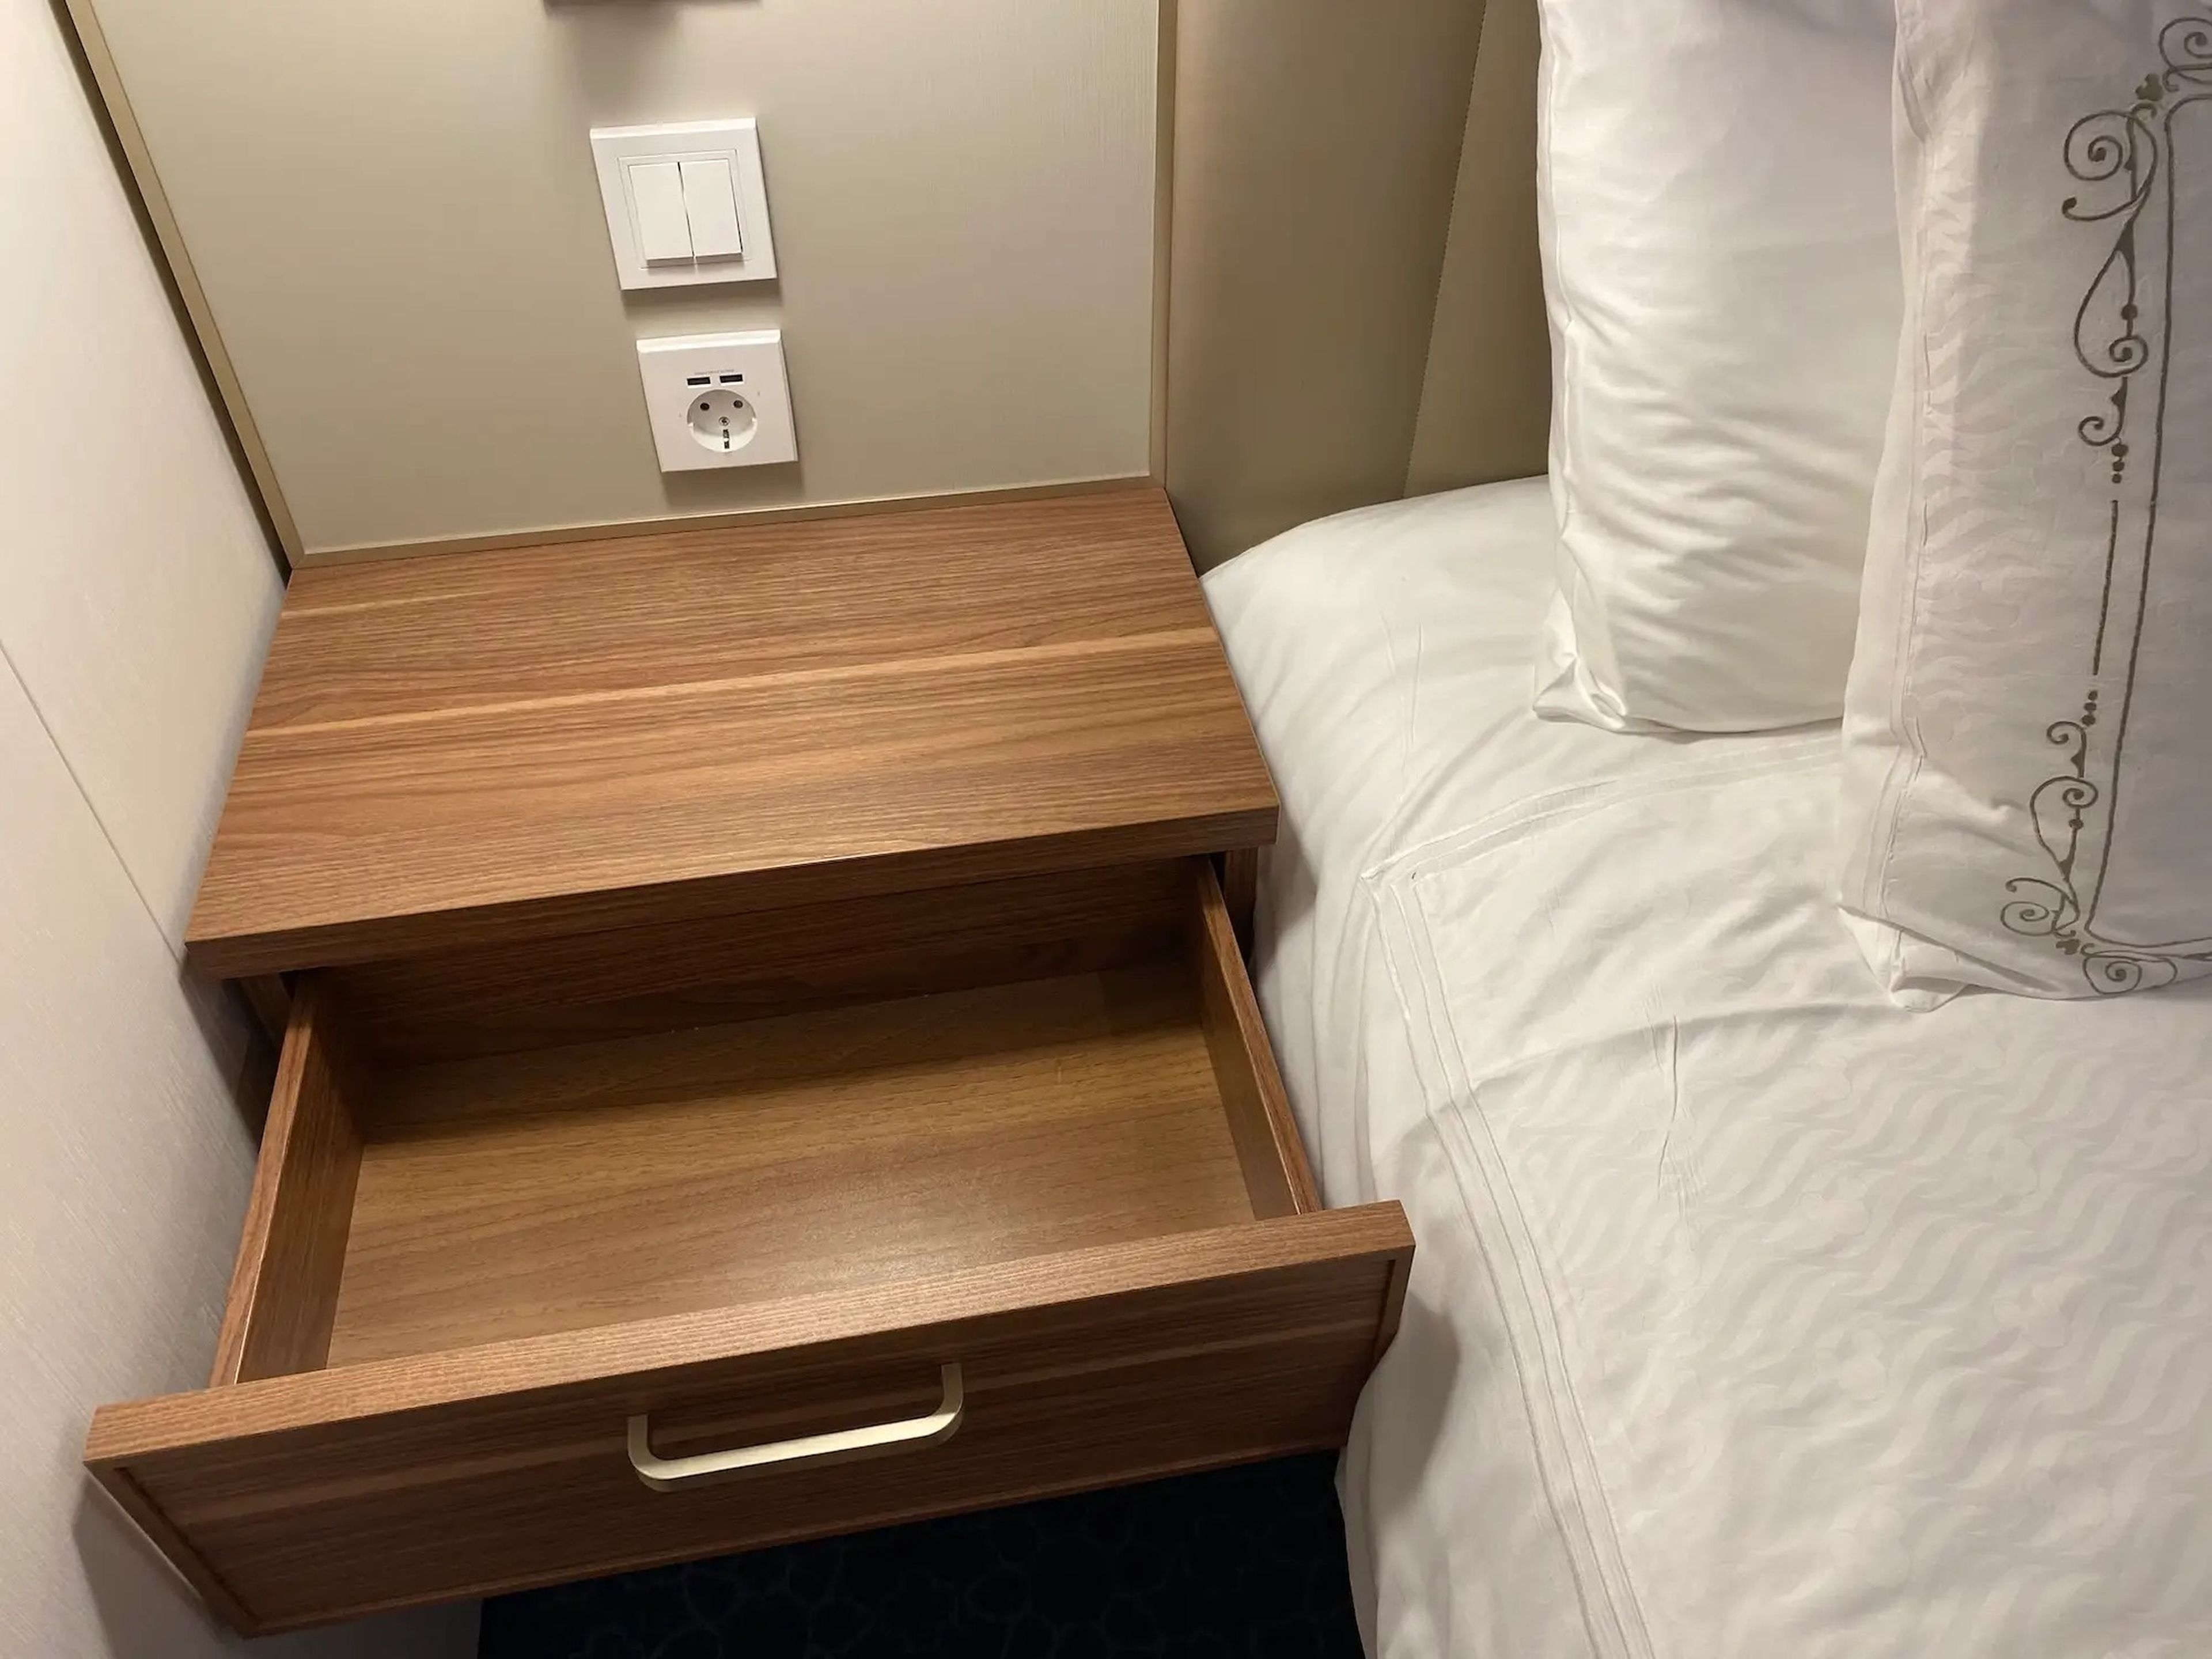 A drawer inside a standard stateroom aboard the Disney Wish cruise.